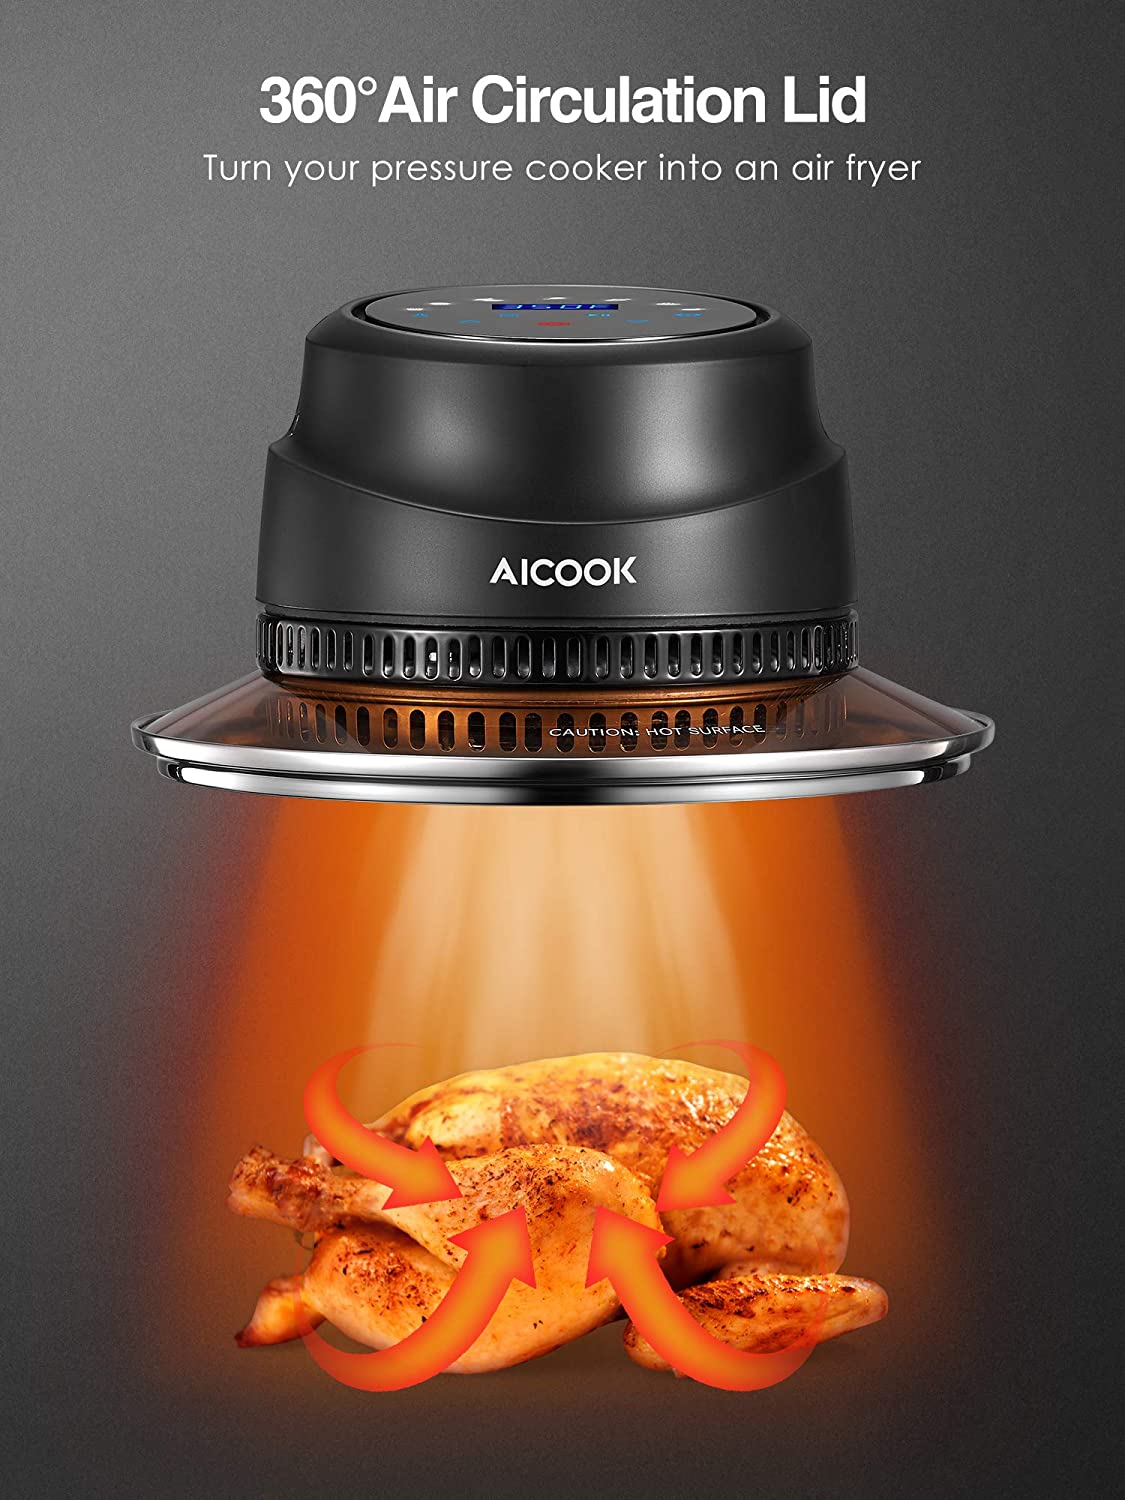 AICOOK | Instant Pot Air Fryer Lid, 7 in 1 Turn Pressure Cooker Into Air Fryer, LED Touchscreen, Accessories and Recipe Included, Air Circulation Lid